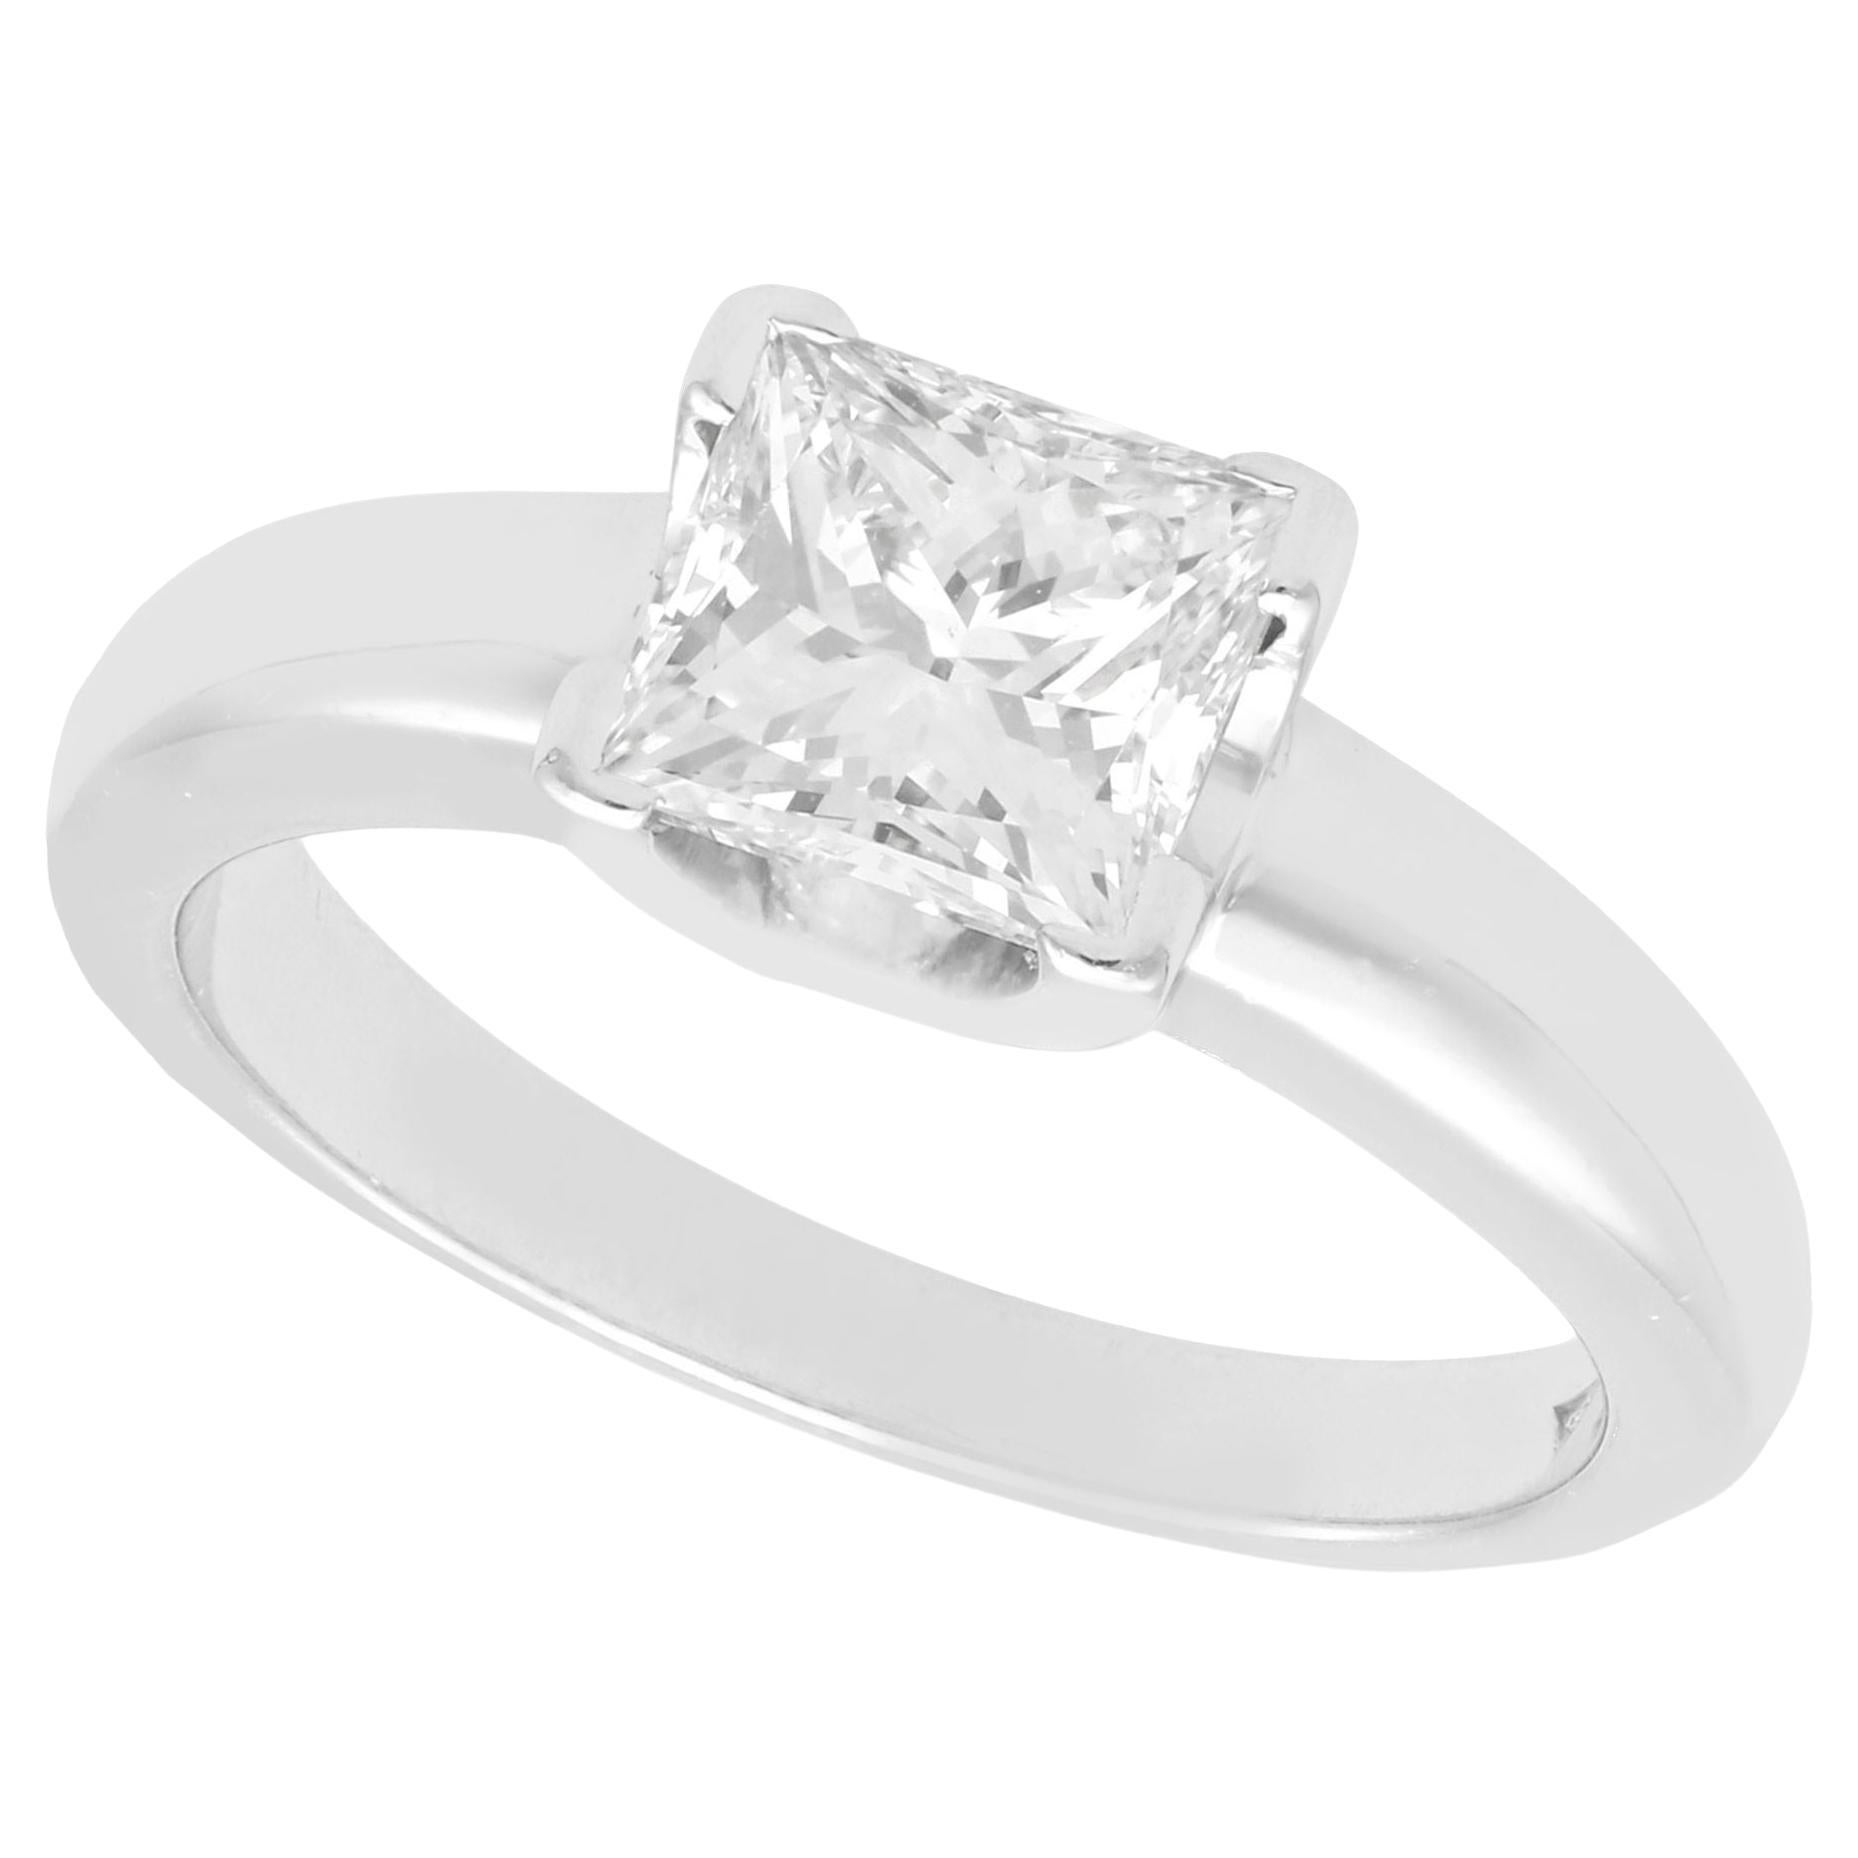 Contemporary 1.52 Carat Diamond and Platinum Solitaire Ring For Sale